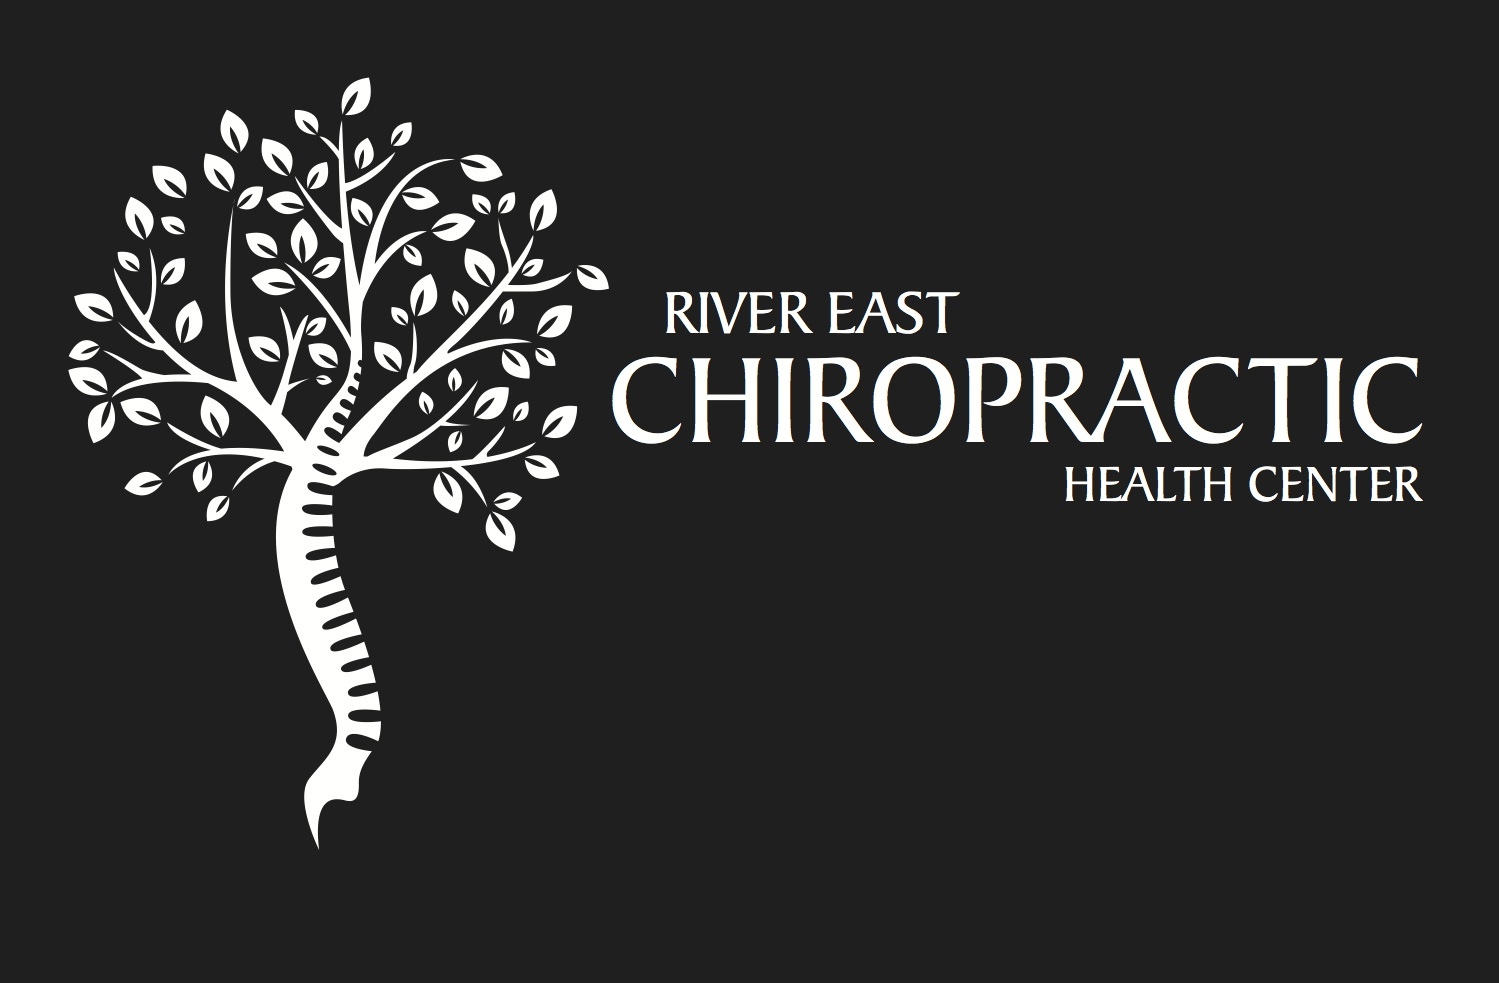 River East Chiropractic Health Center